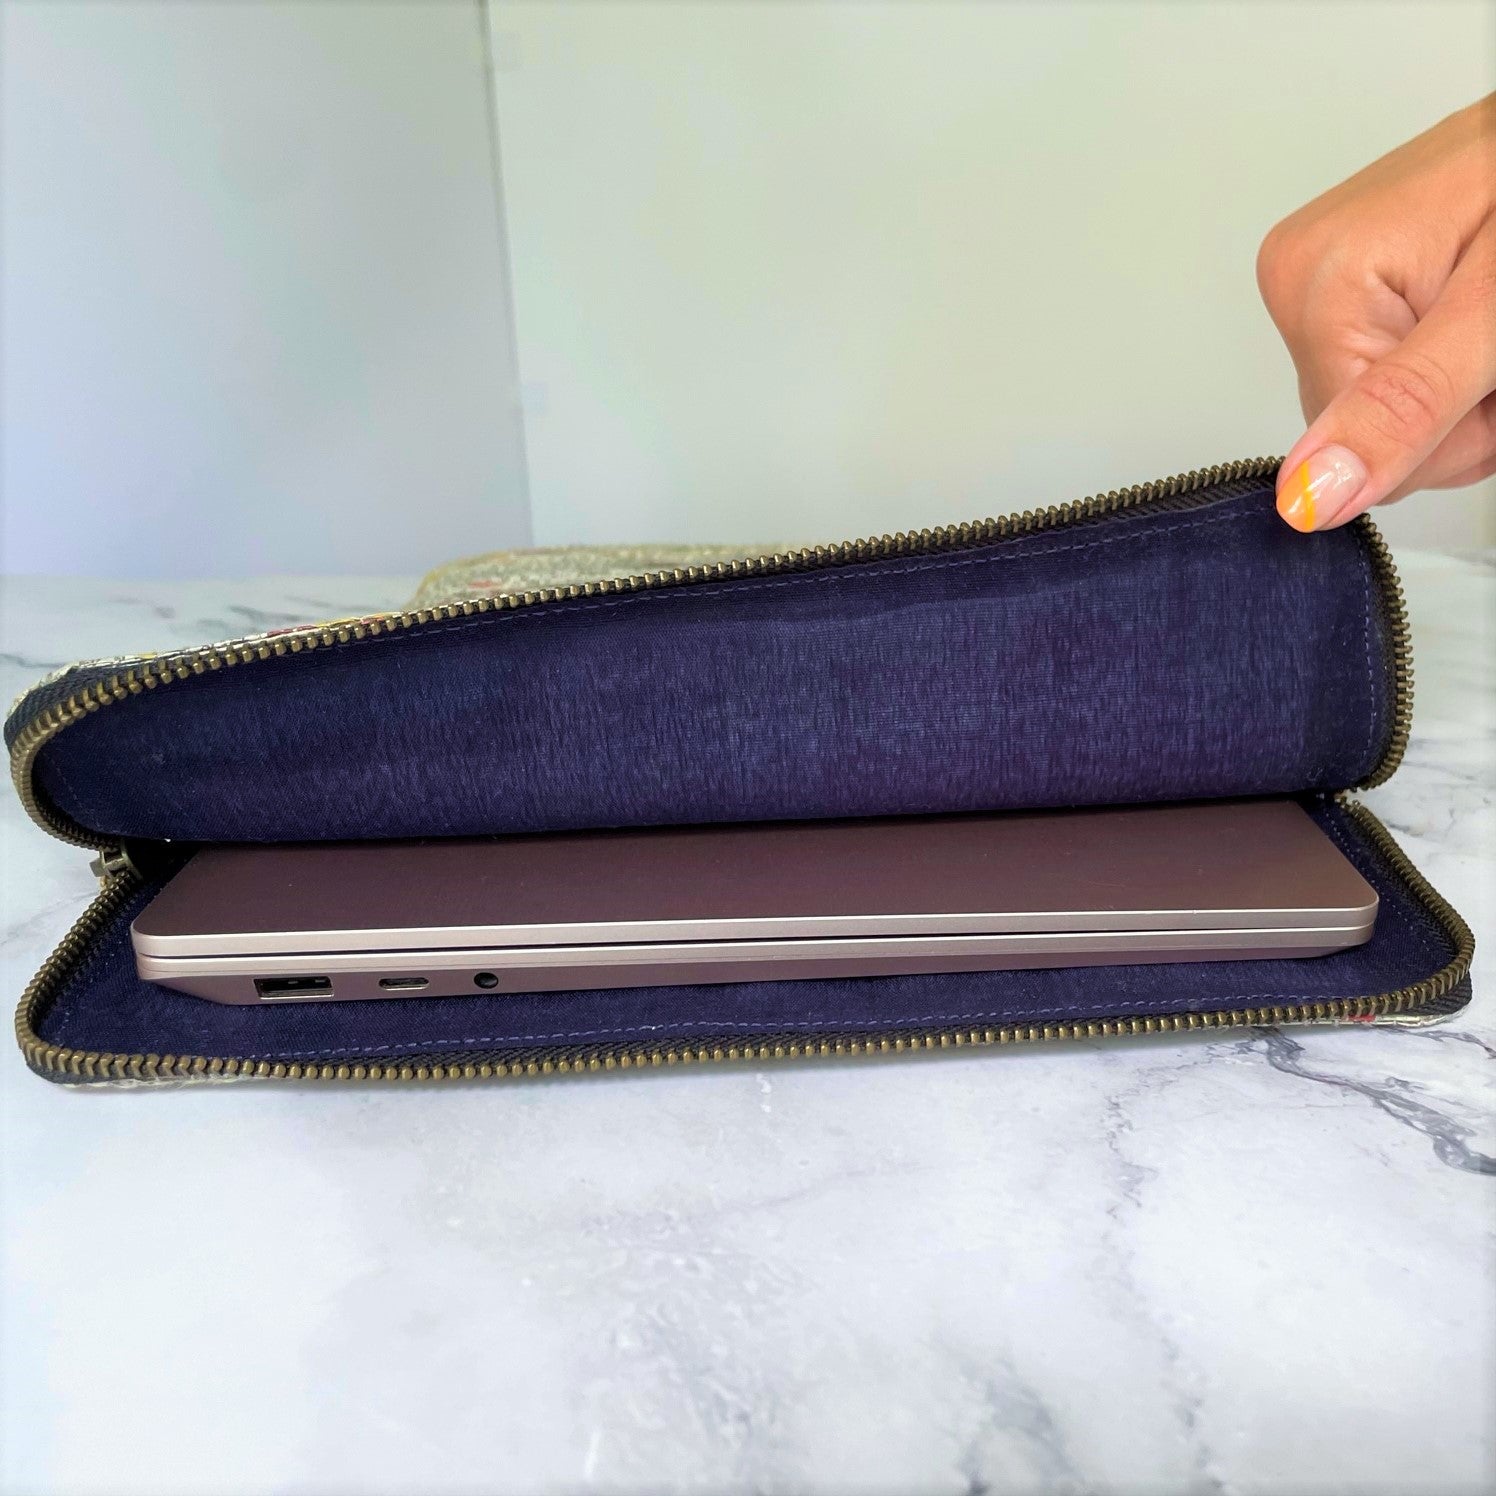 Woven laptop sleeve with cork lining